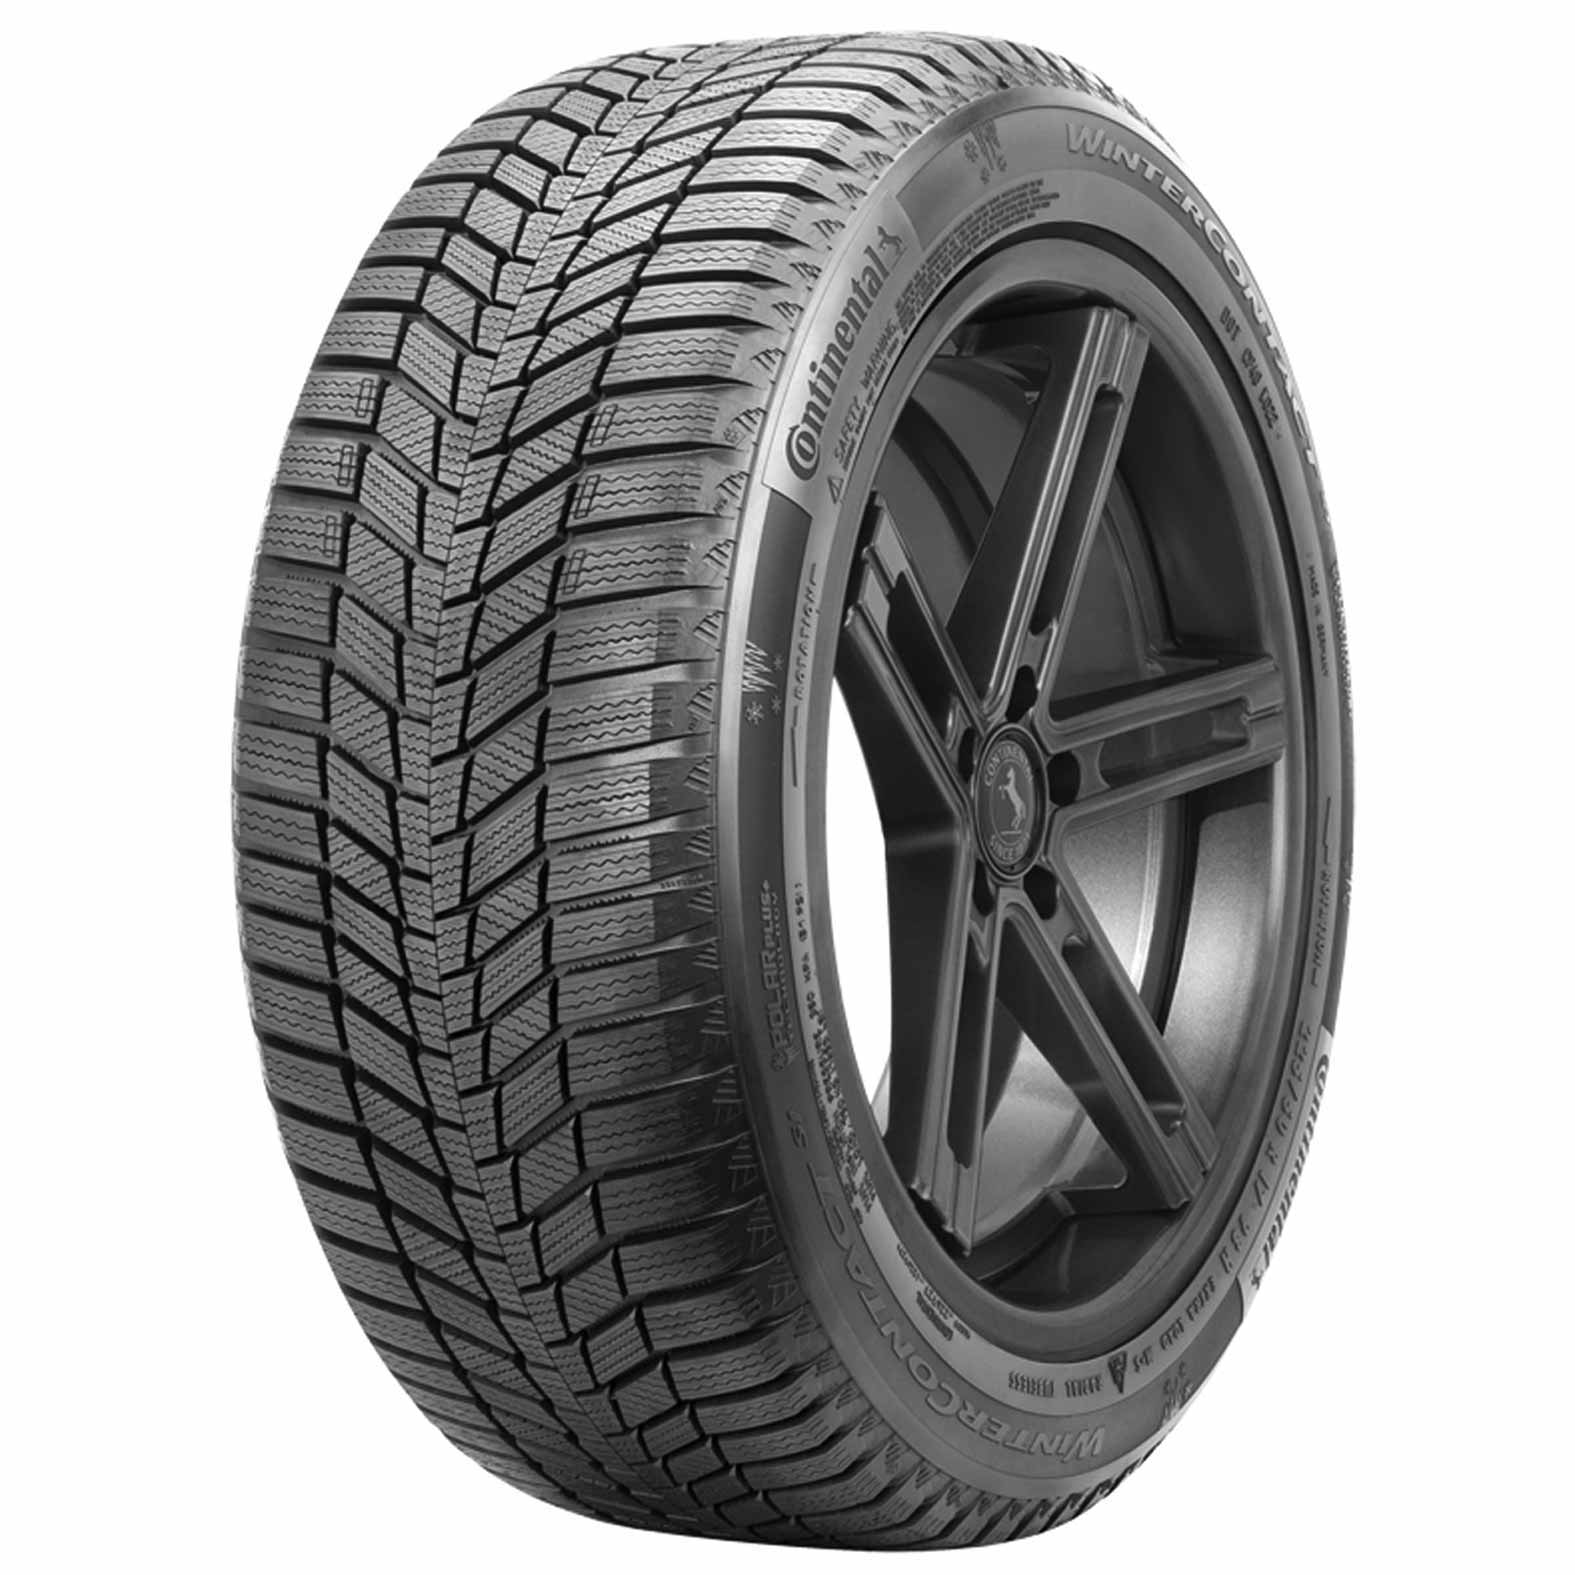 continental-wintercontact-si-tires-for-winter-kal-tire